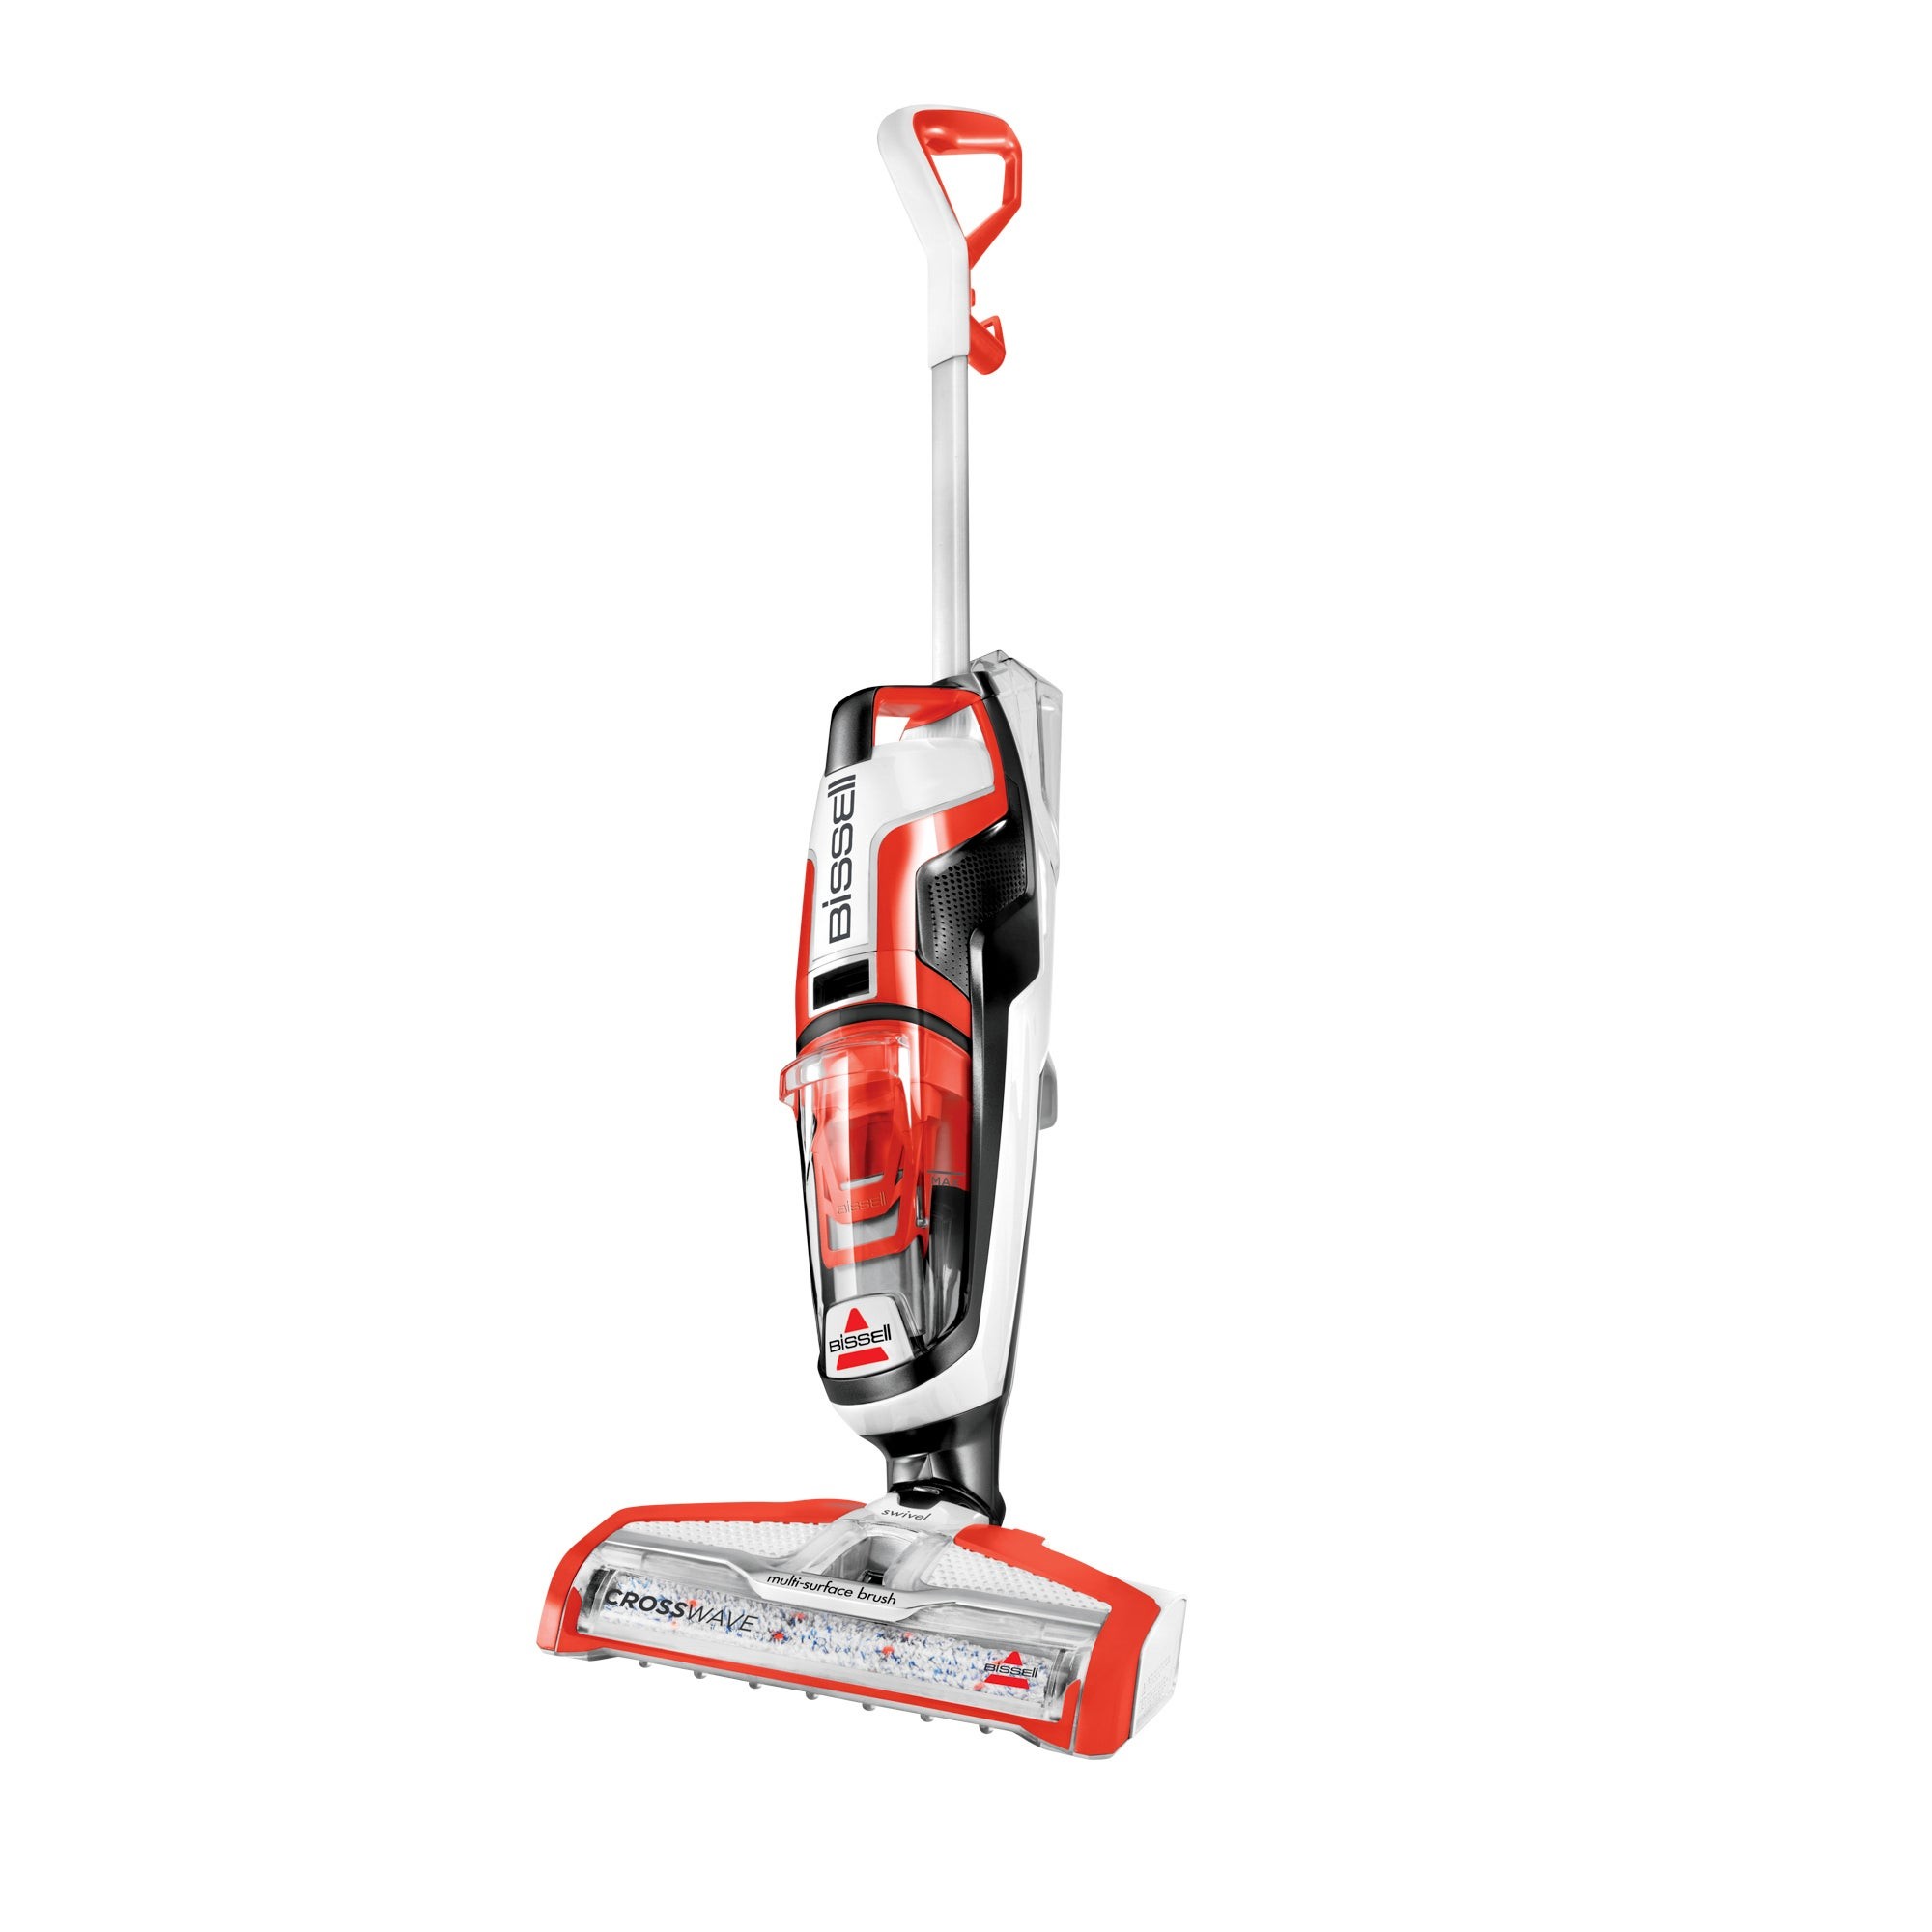 Crosswave All-in-One Multi-Surface Wet/Dry Vac